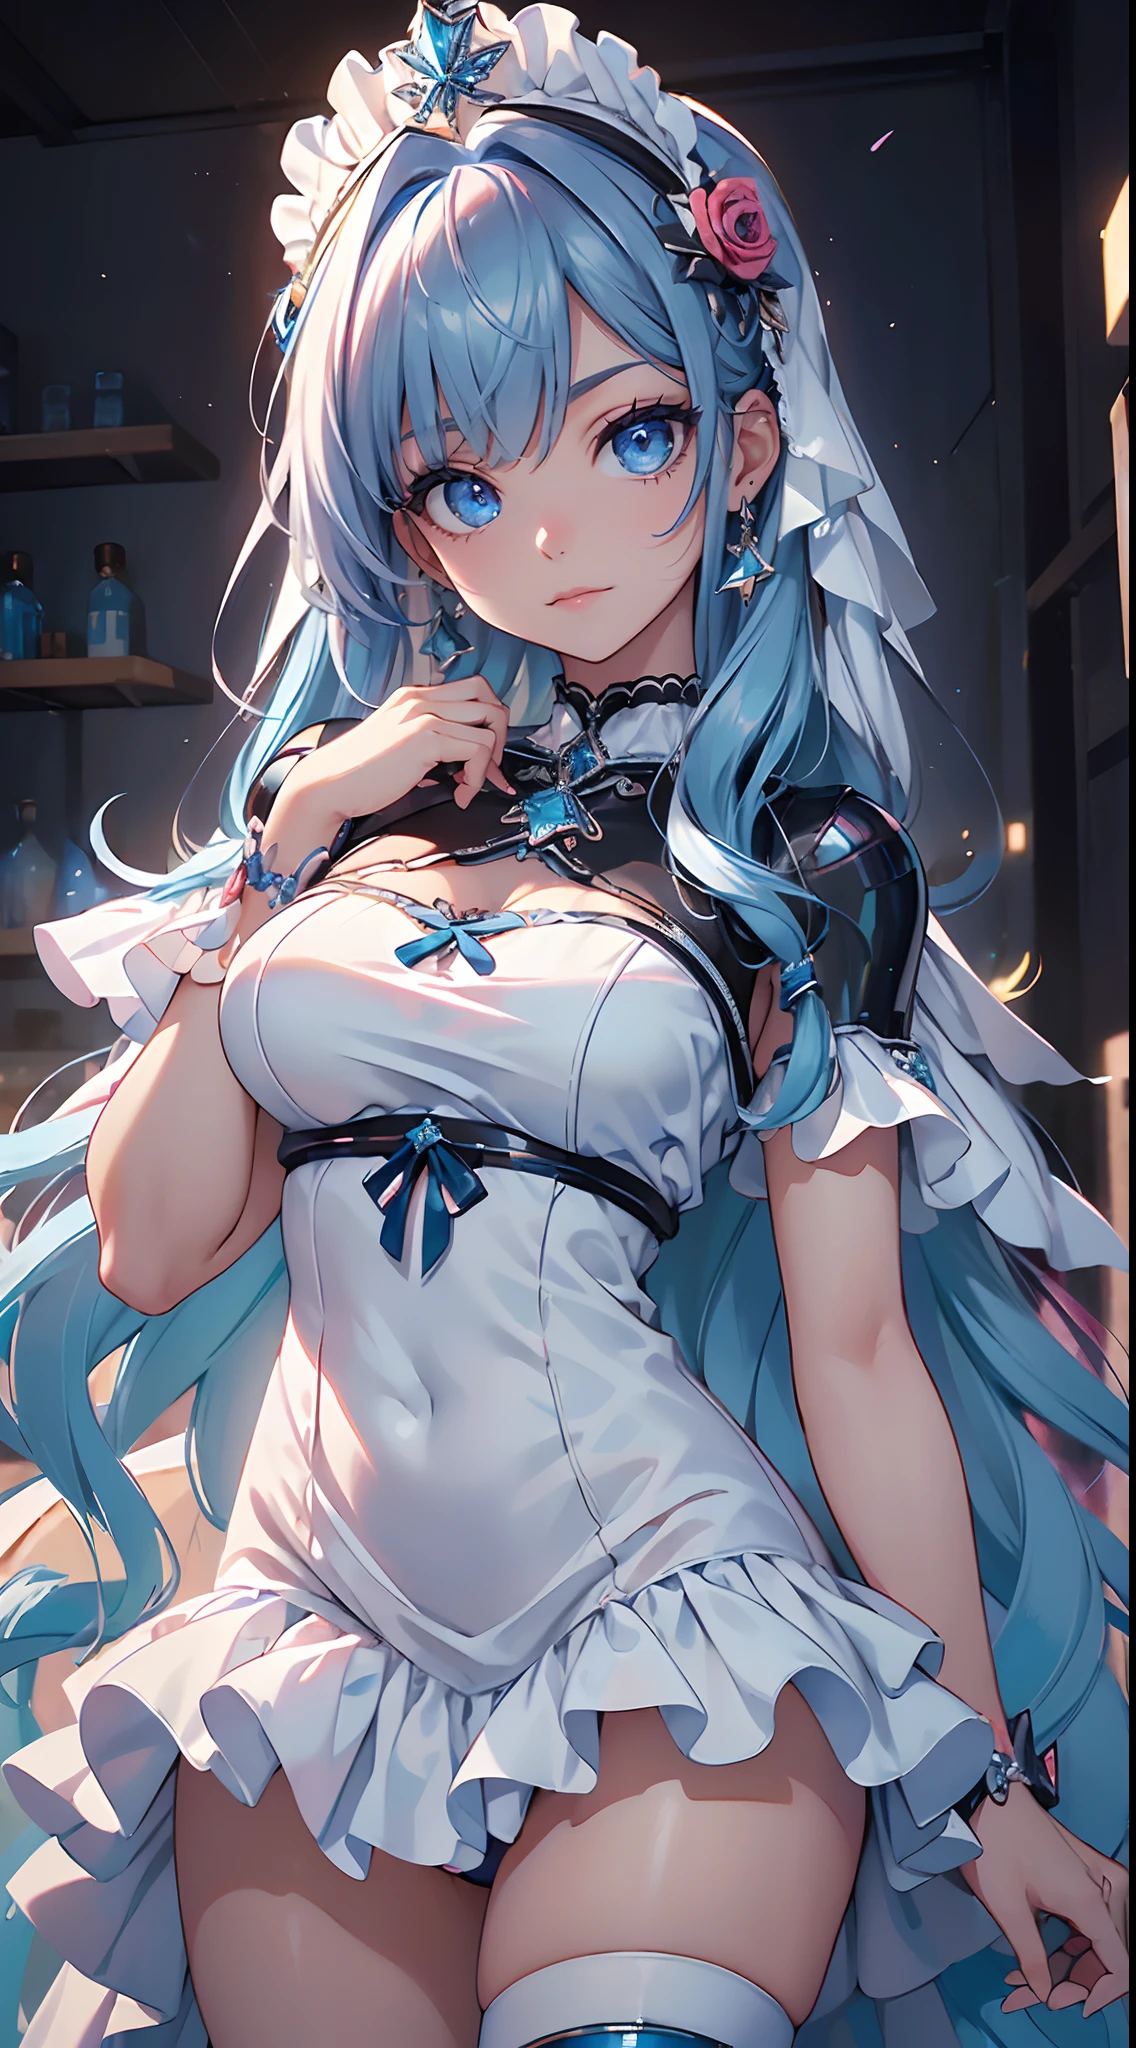 Best Quality，tmasterpiece，ultimate resolution，suave，extremely colorful，Color，mermaid princess，(white Lolita Dress:1.4)，Black stockings，Starrysky Android!,More detailed 8K.unreal engine:1.4,UHD,La Best Quality:1.4, photorealistic:1.4, skin texture:1.4, Masterpiece:1.8,first work, Best Quality,object object], (detailed face features:1.3),(Blue Robotic Laboratory:1.4),(long pink hair:1.4),（Beautiful and detailed eye description）,(hands:1.4),(mostrando su panties white:1.4),(showing back:1.4 )